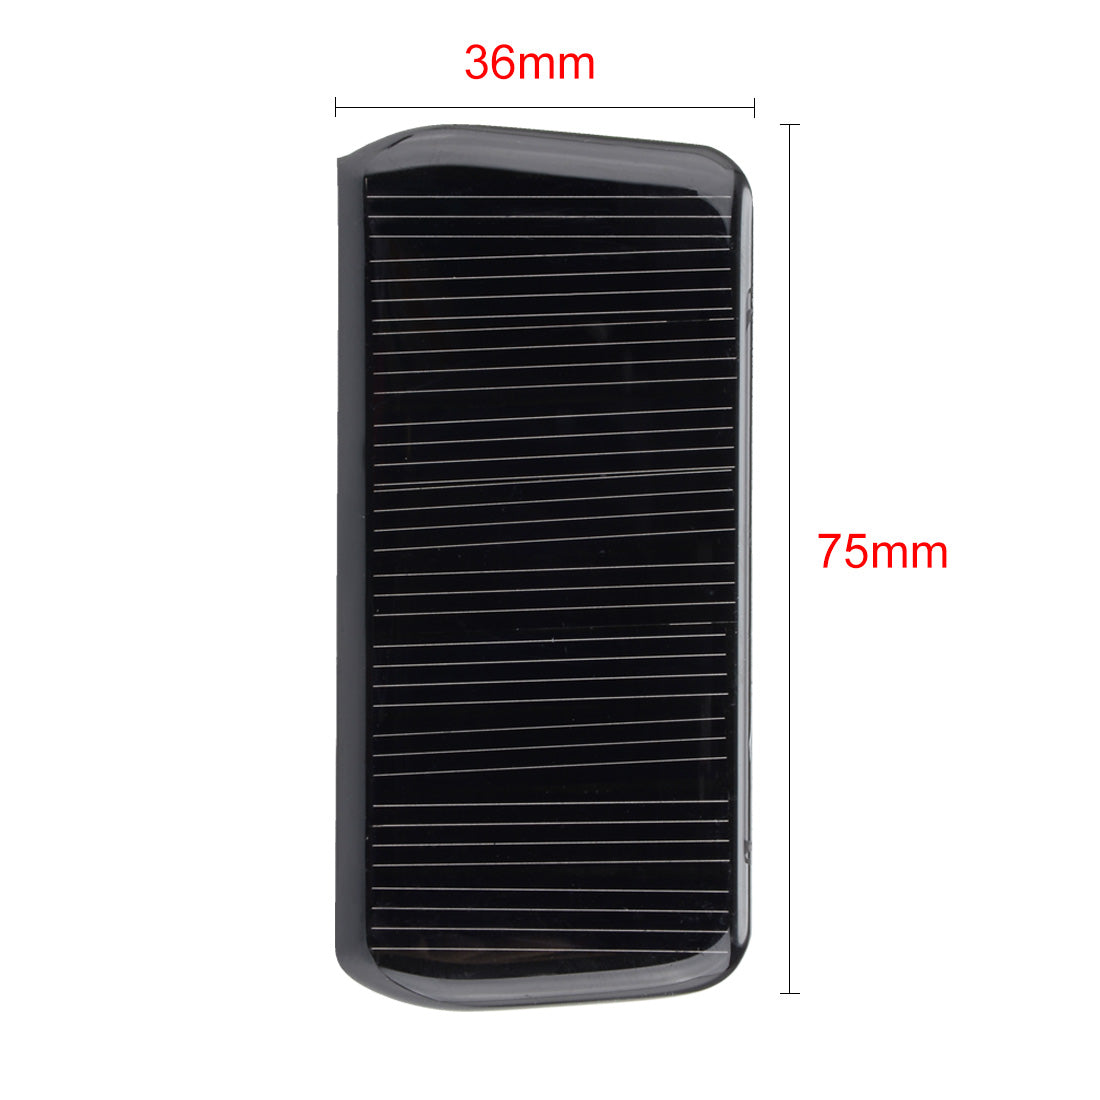 uxcell Uxcell 5Pcs 5V 60mA Poly Mini Solar Cell Panel Module DIY for Phone Light Toys Charger 75mm x 36mm